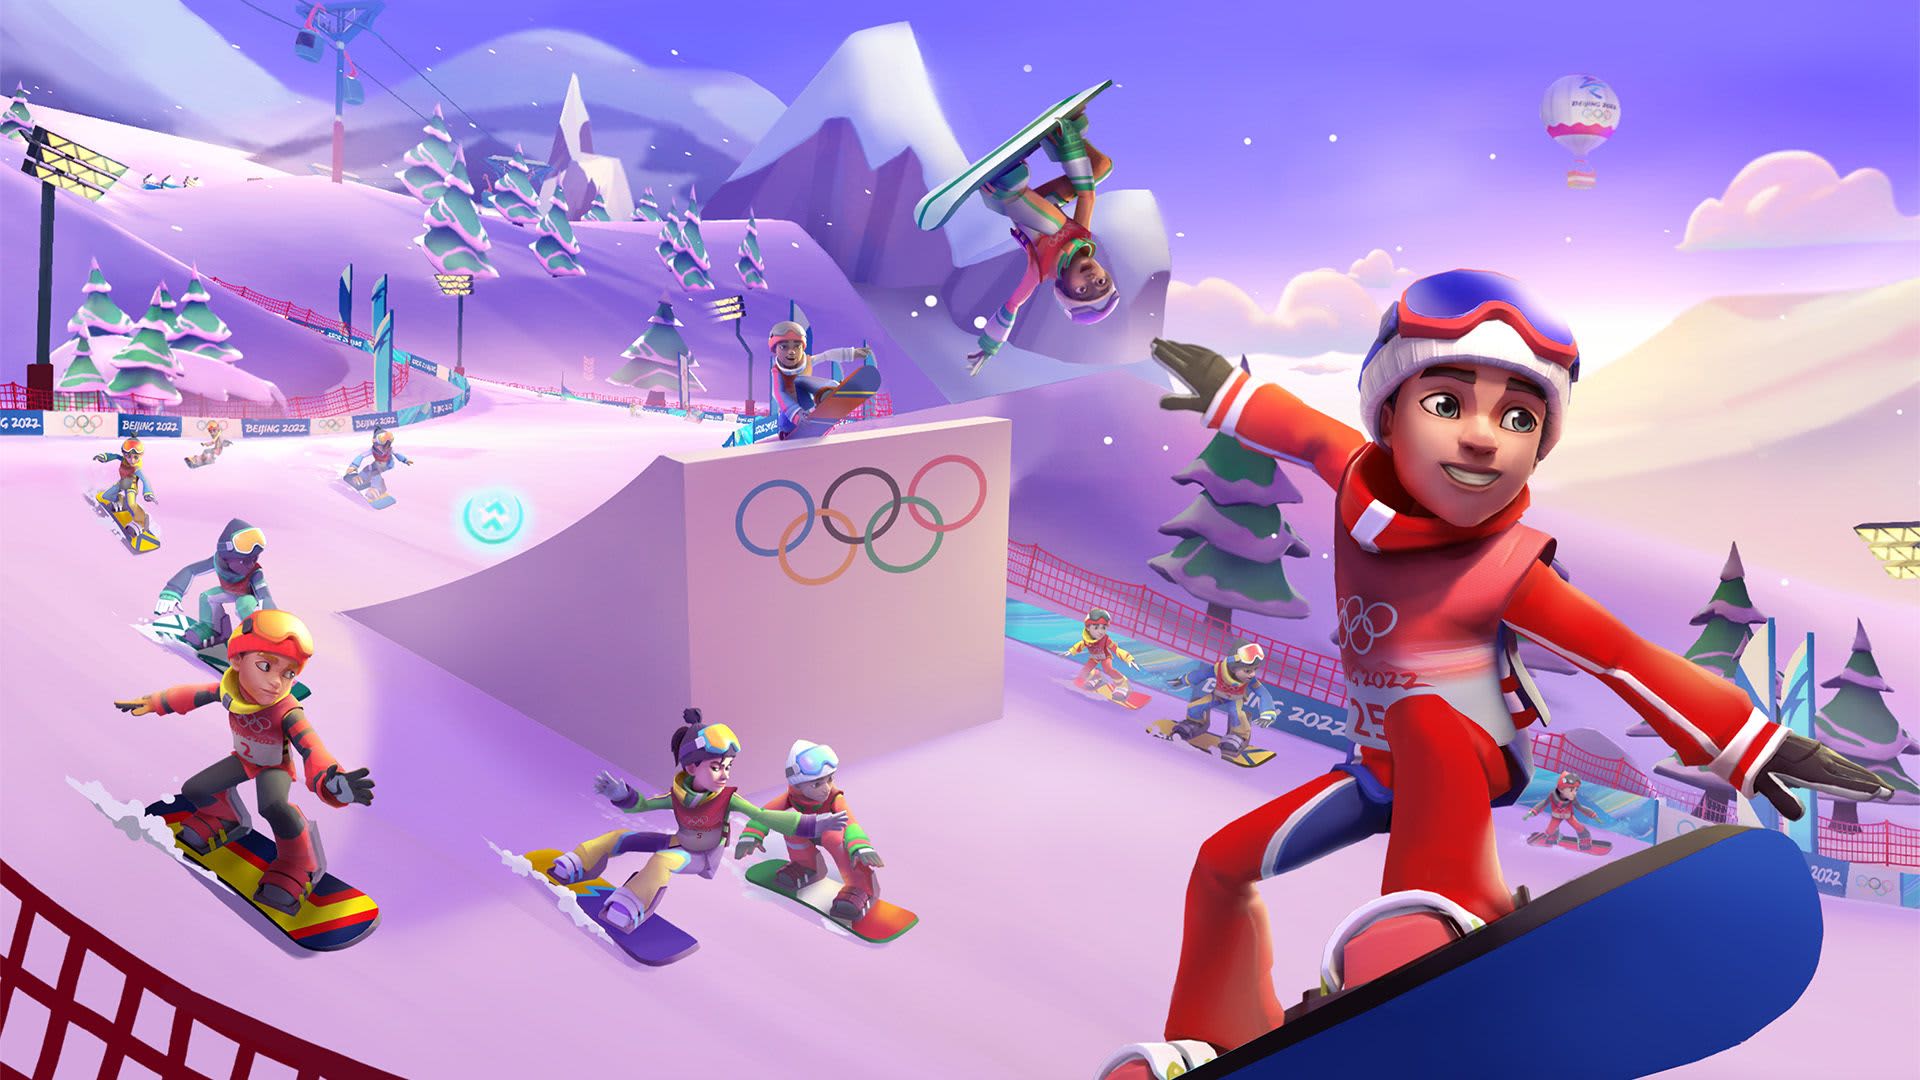 IOC launches mobile game with NFTs